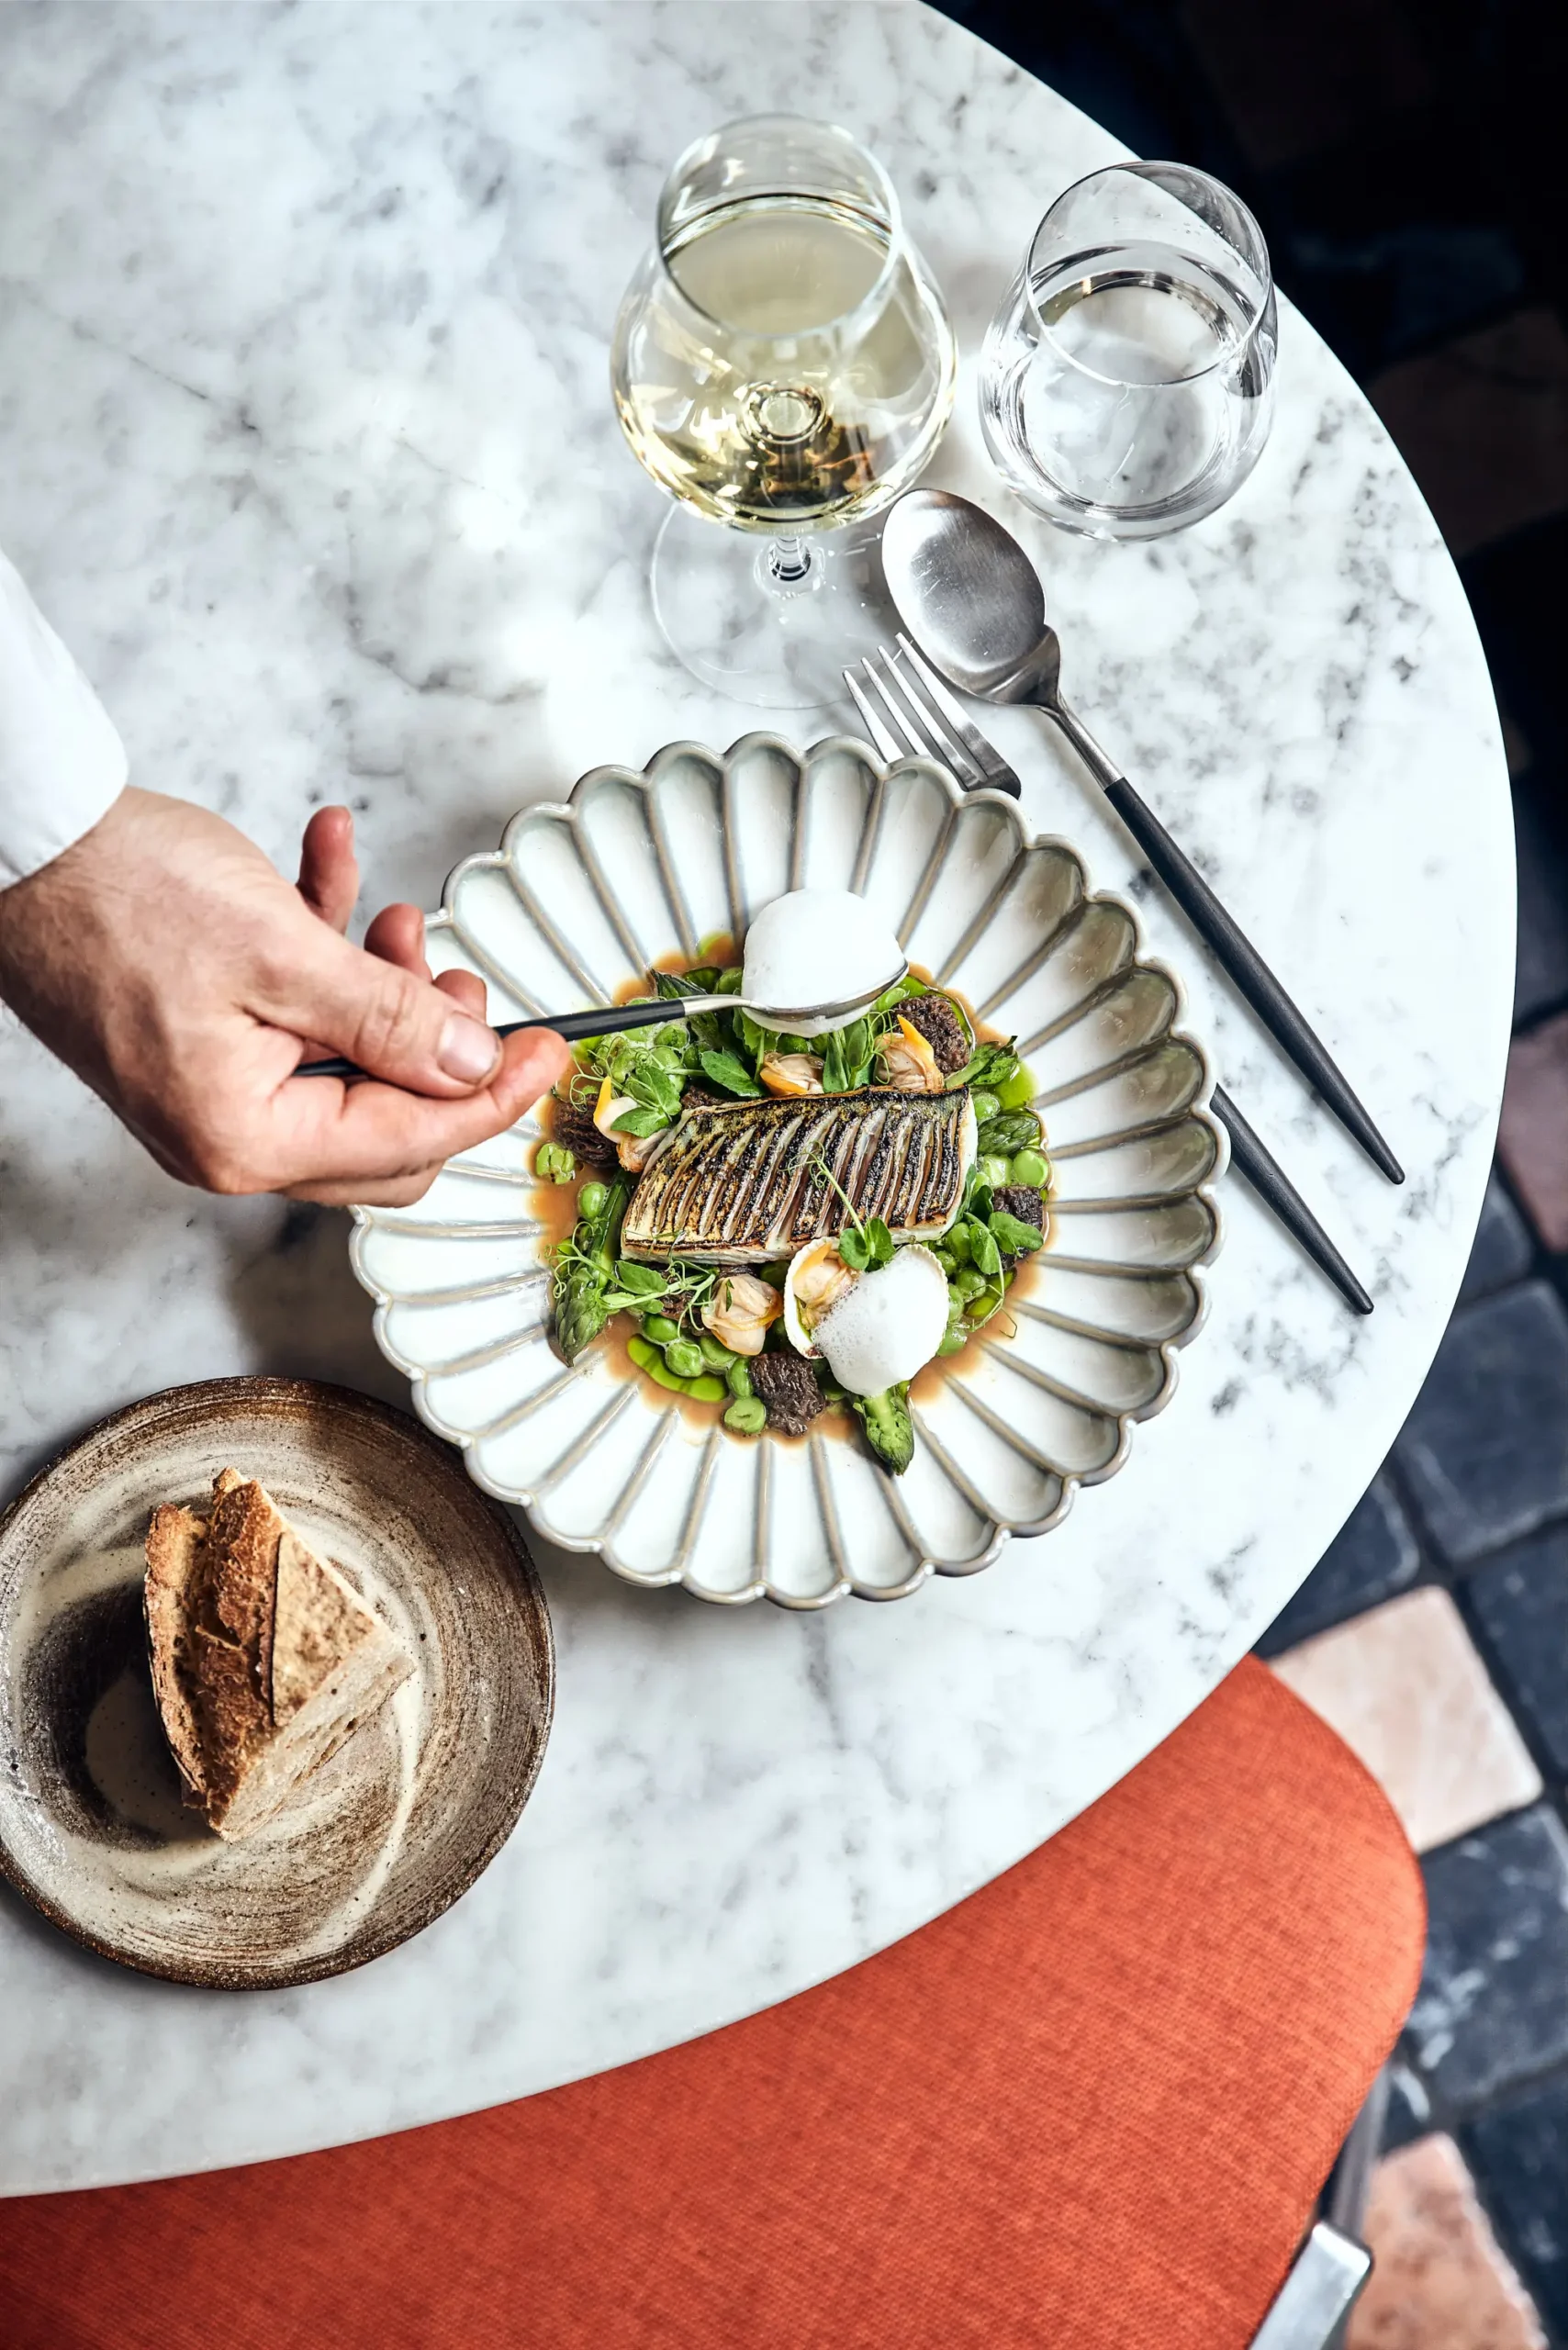 A gastronomic delight at Virtus, one of the cheapest Michelin Star restaurants in Paris , with a beautifully plated grilled fish adorned with fresh greens, a dollop of cream, and served with a glass of white wine and artisanal bread.